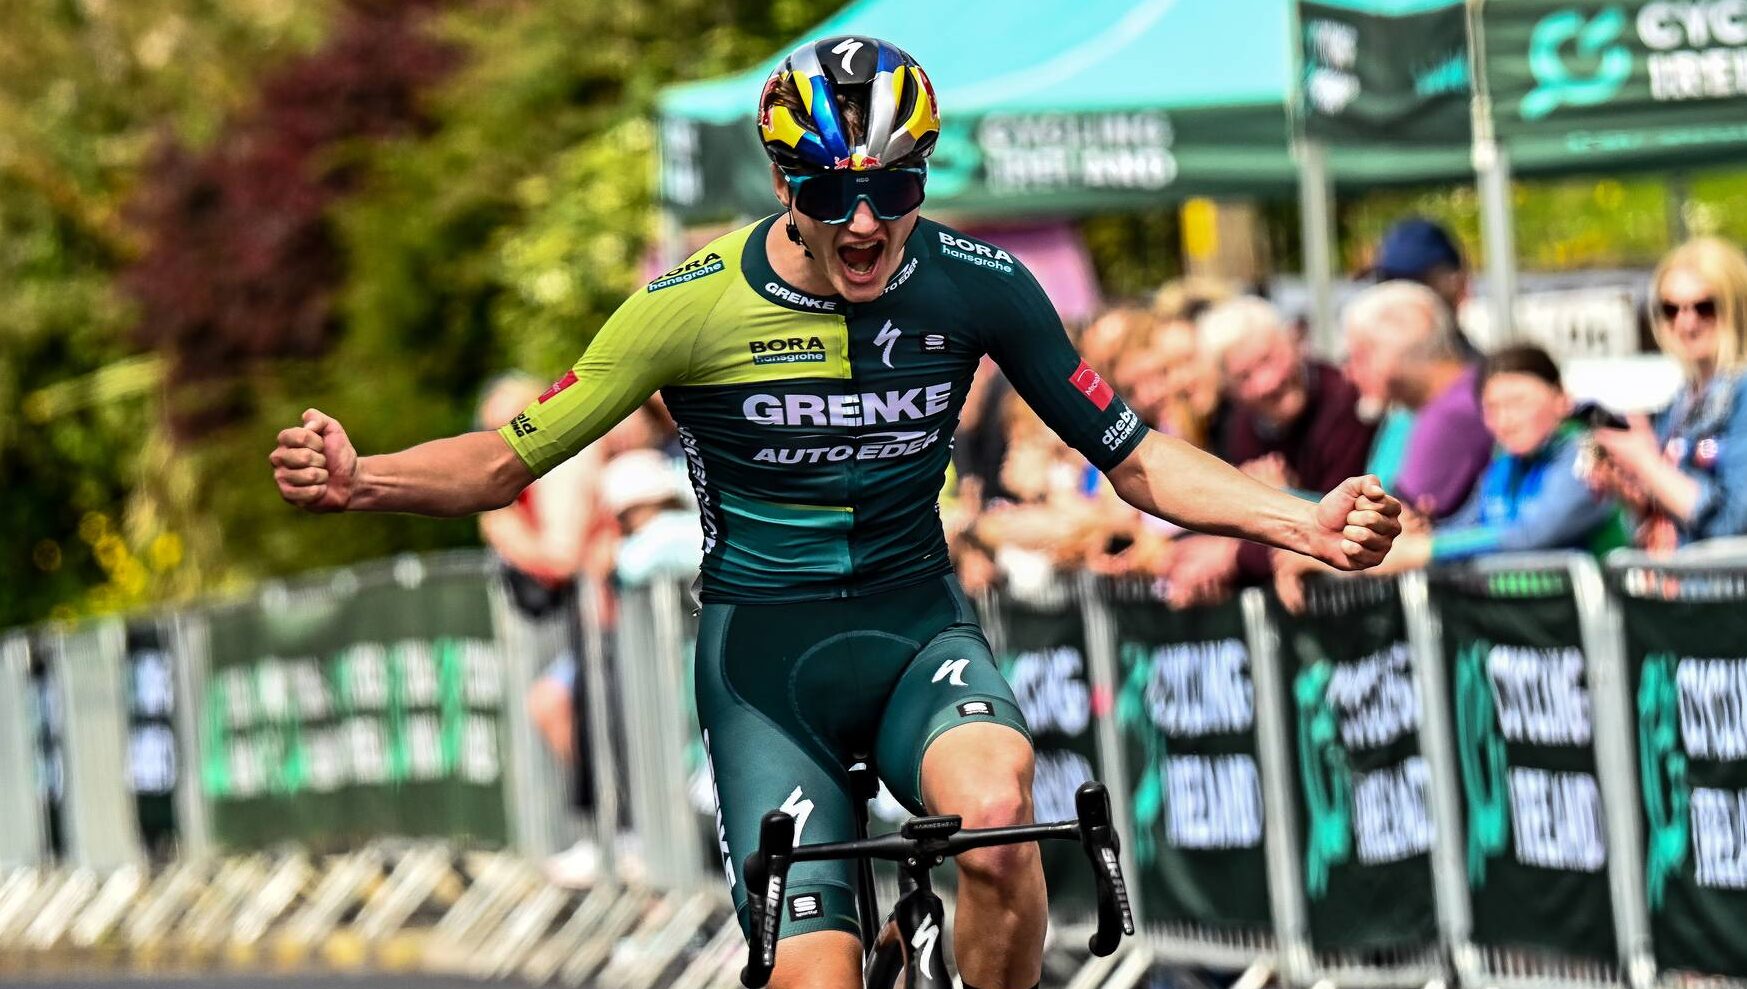 Patrick Casey races from front to become Irish junior champion